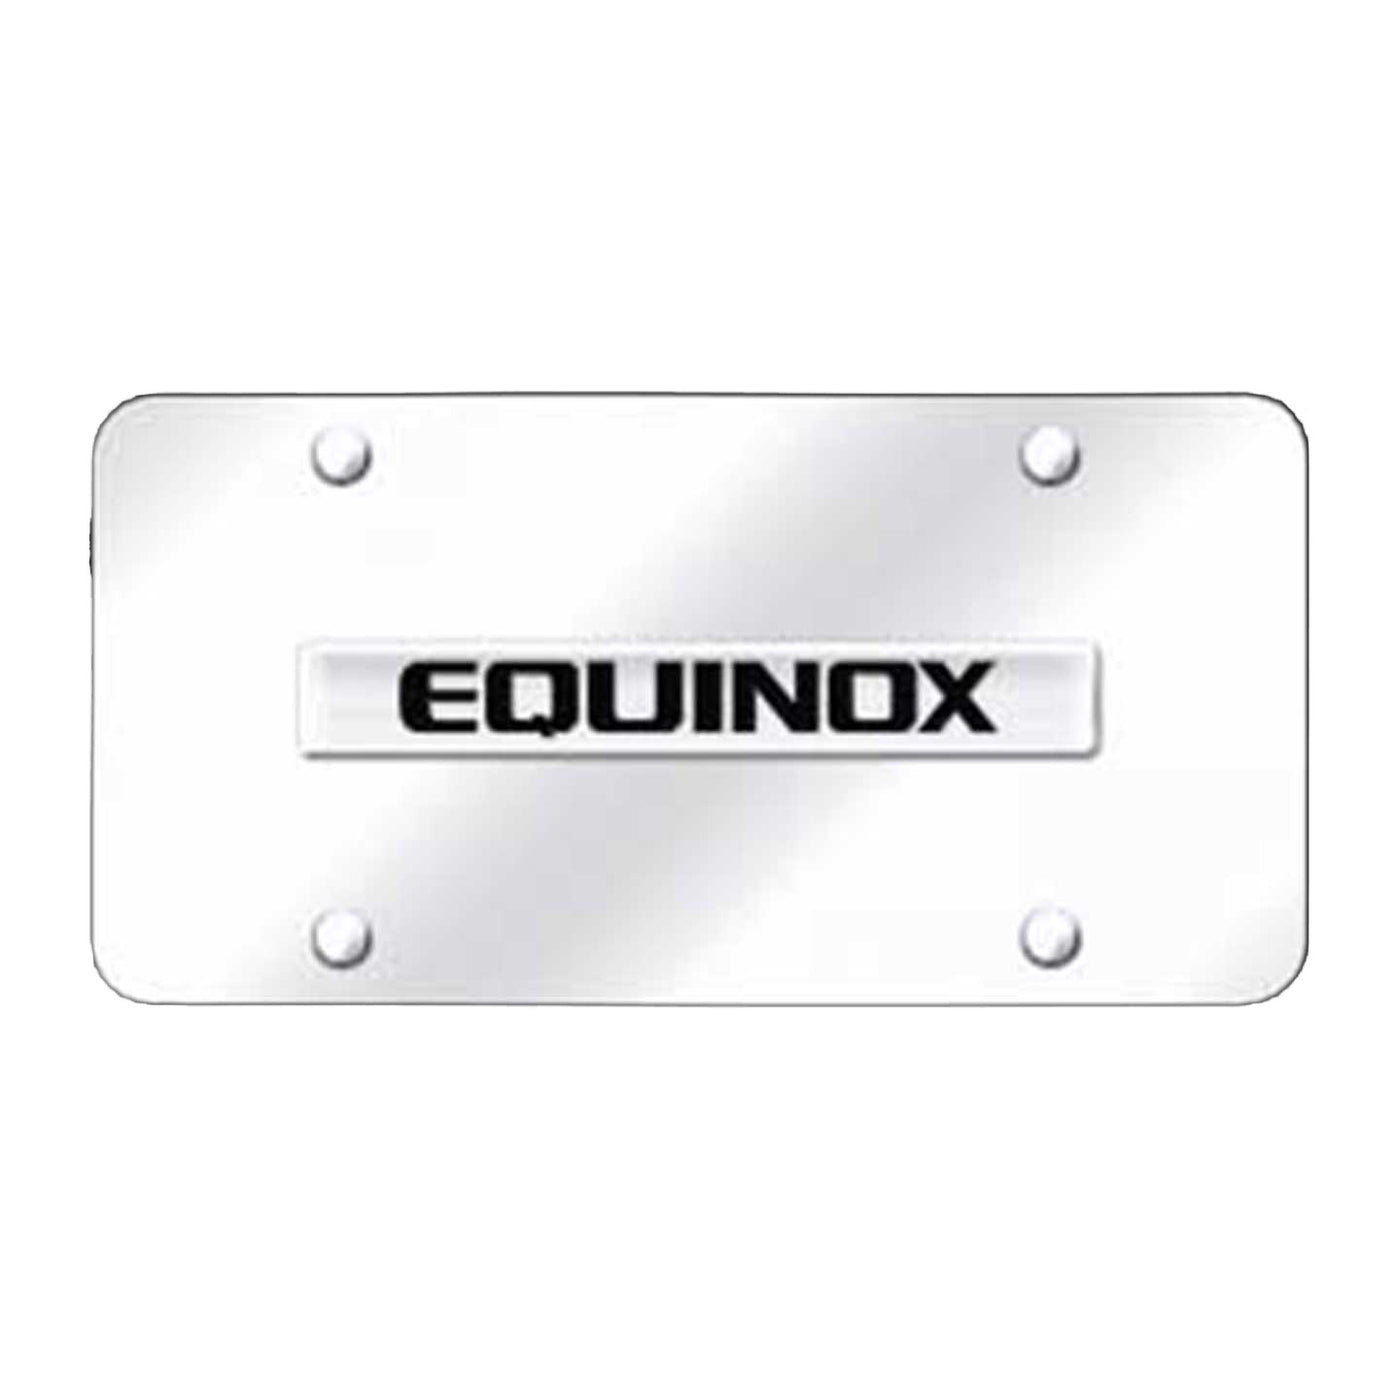 Equinox Name License Plate - Chrome on Mirrored